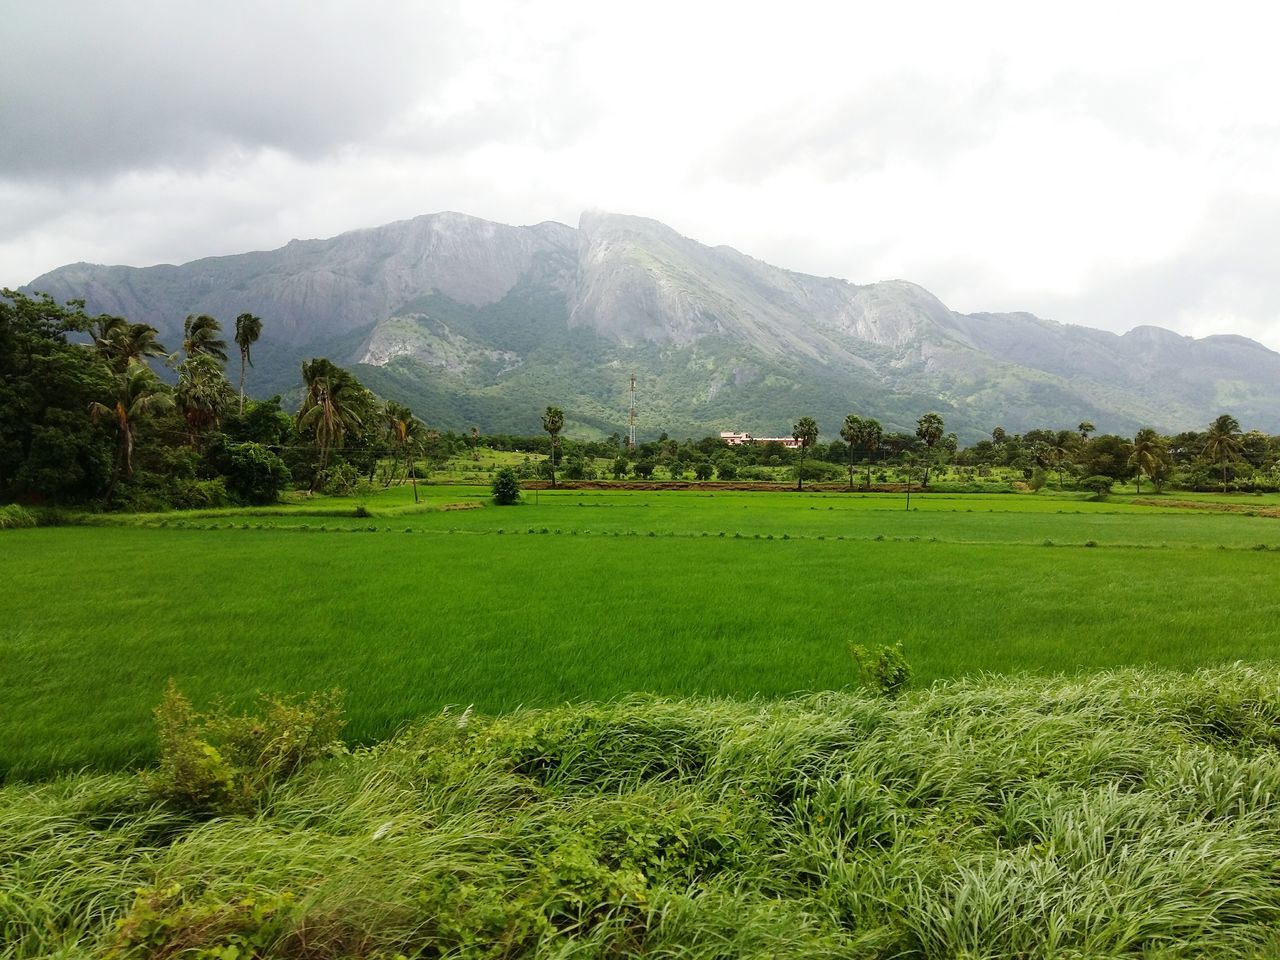 mountain, tranquil scene, tranquility, scenics, landscape, grass, green color, beauty in nature, mountain range, sky, cloud - sky, field, nature, growth, non-urban scene, rural scene, agriculture, grassy, farm, outdoors, no people, cloudy, green, cultivated land, solitude, farmland